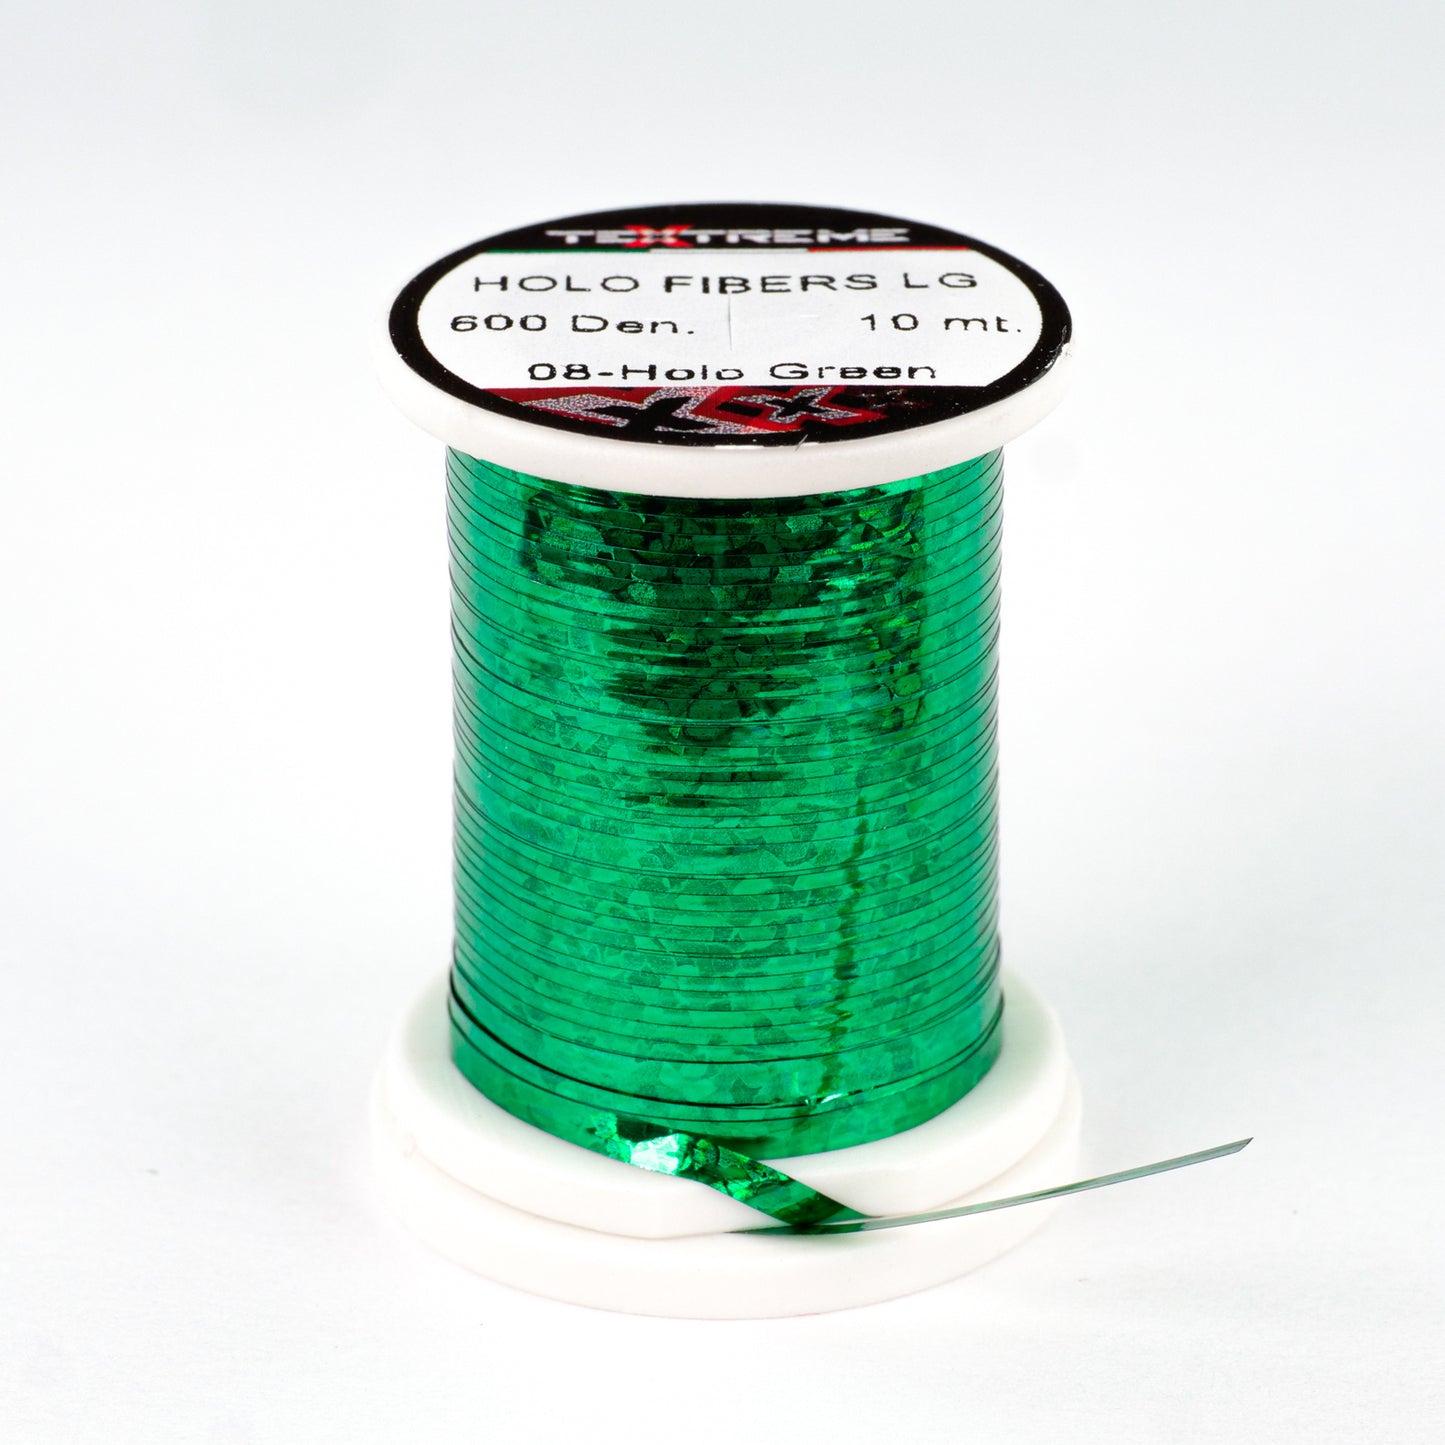 Textreme Holographic Fibers (Spooled Holographic Tinsel)